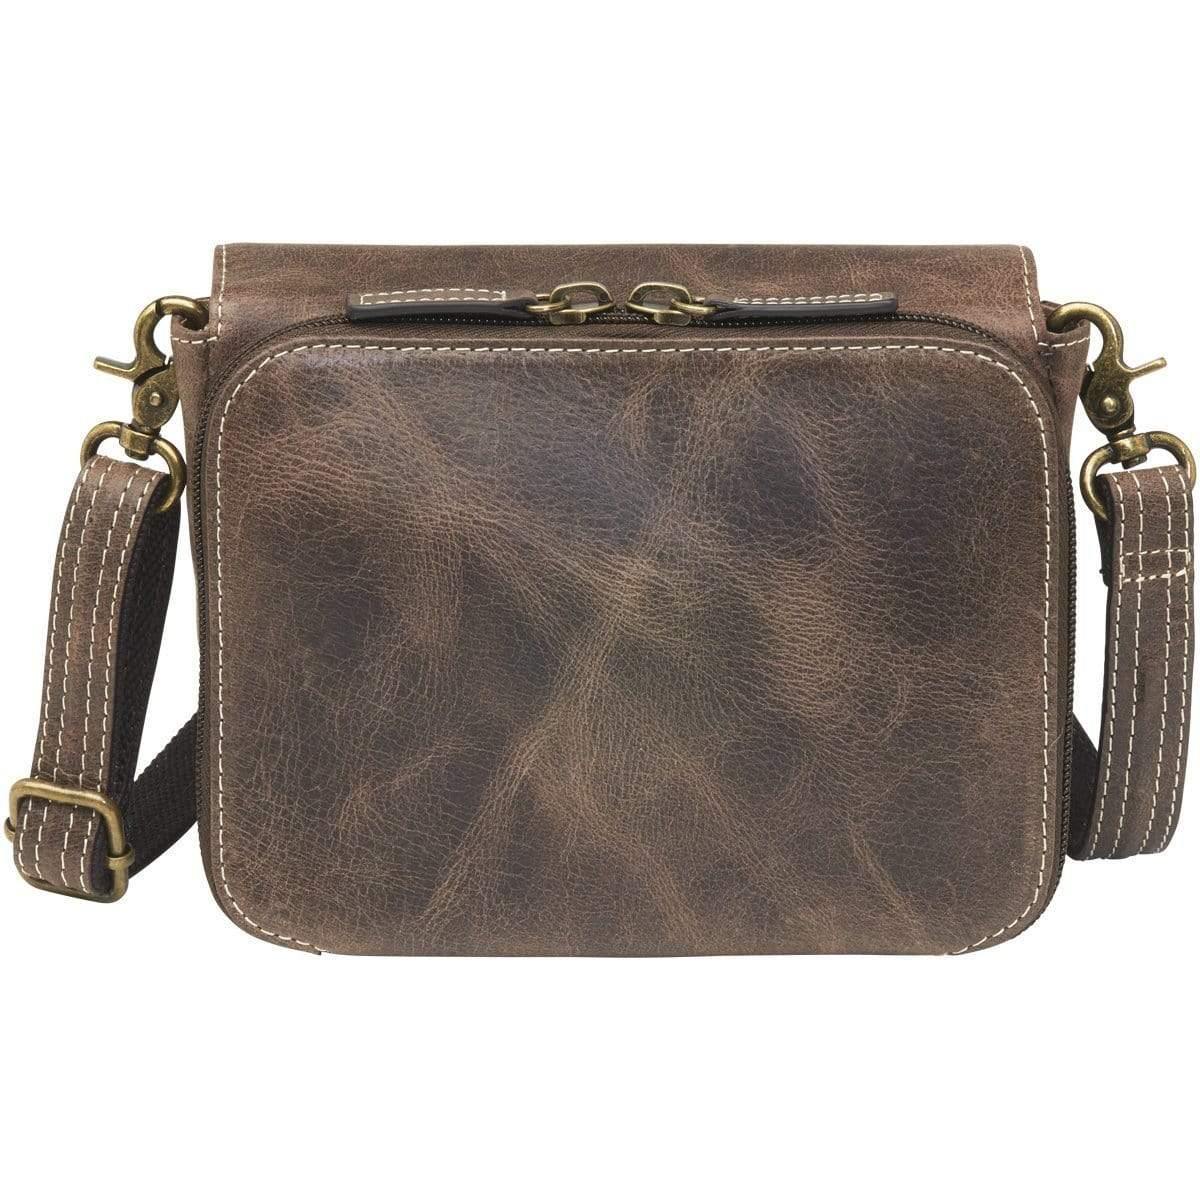 Concealed Carry Distressed Buffalo Leather Cross Body Organizer Purse by GTM Original